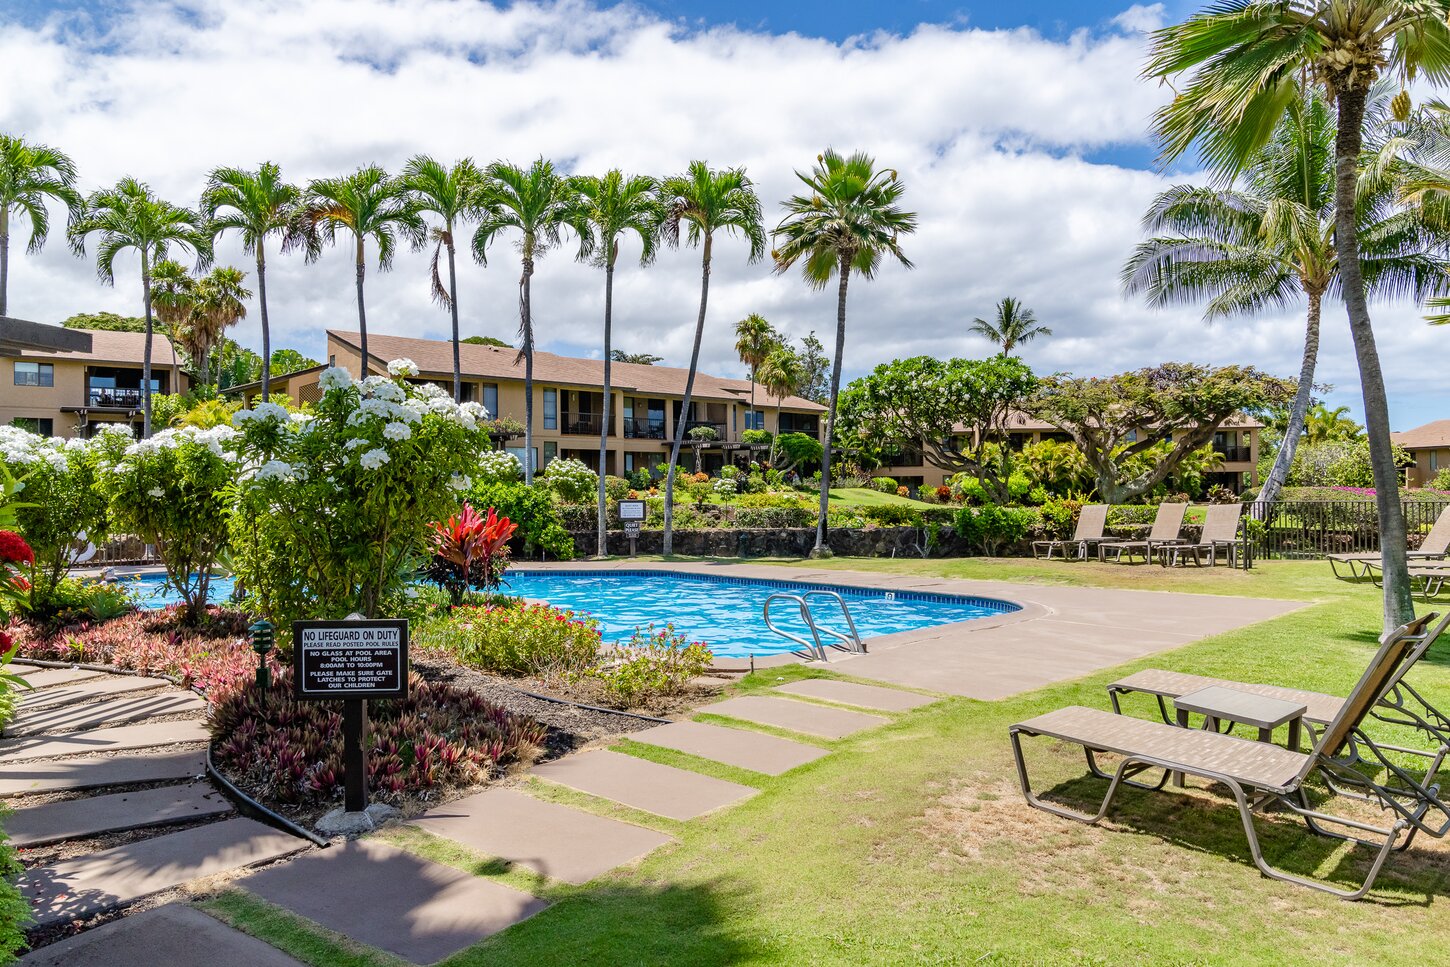 The closest quiet pool is a one minute walk off the back lanai. There are gas BBQs here as well!